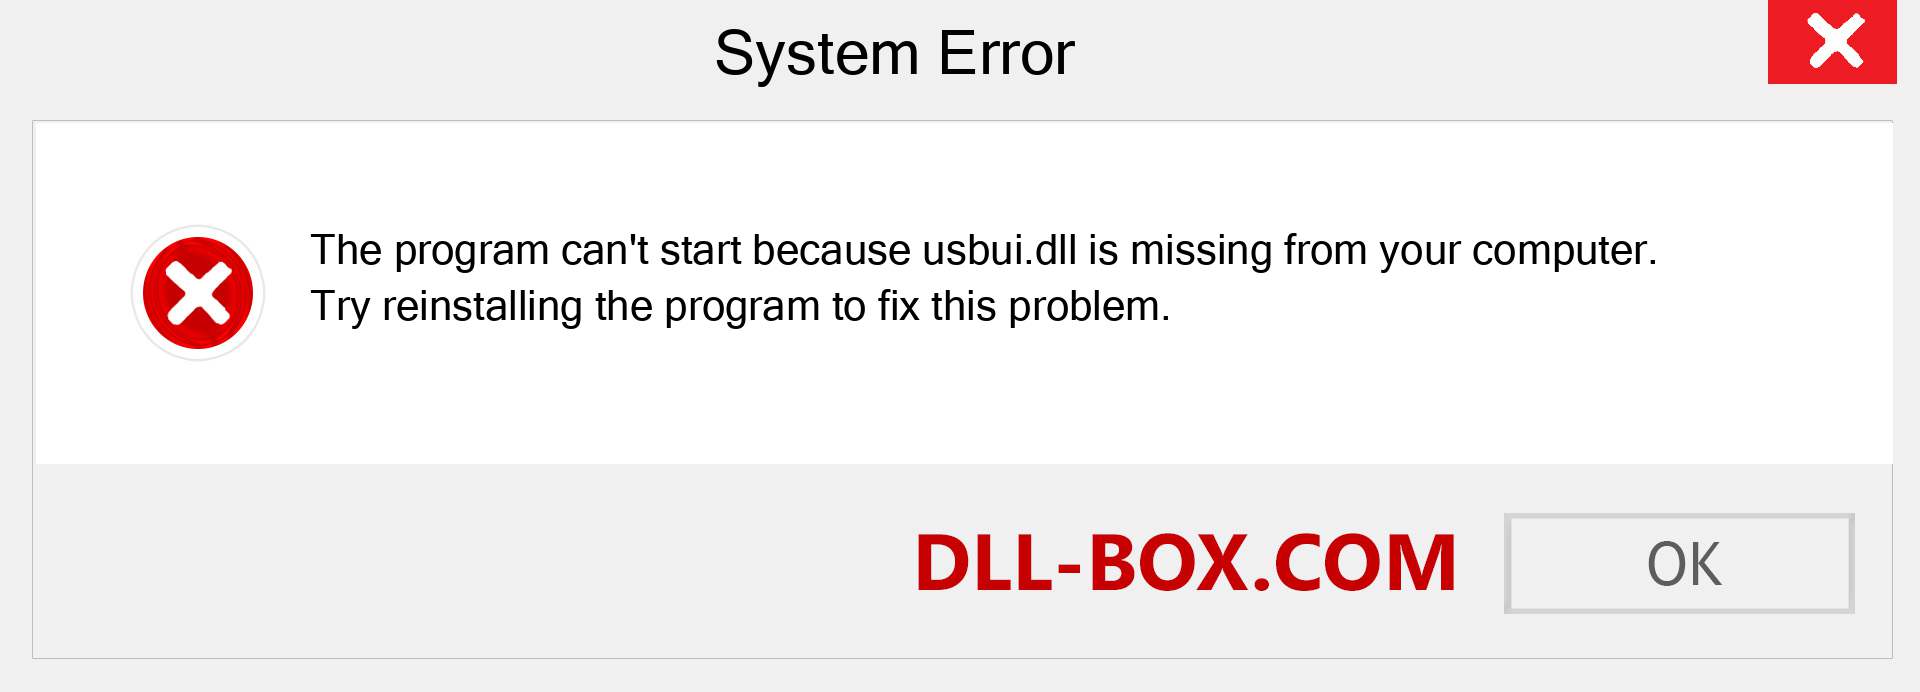  usbui.dll file is missing?. Download for Windows 7, 8, 10 - Fix  usbui dll Missing Error on Windows, photos, images